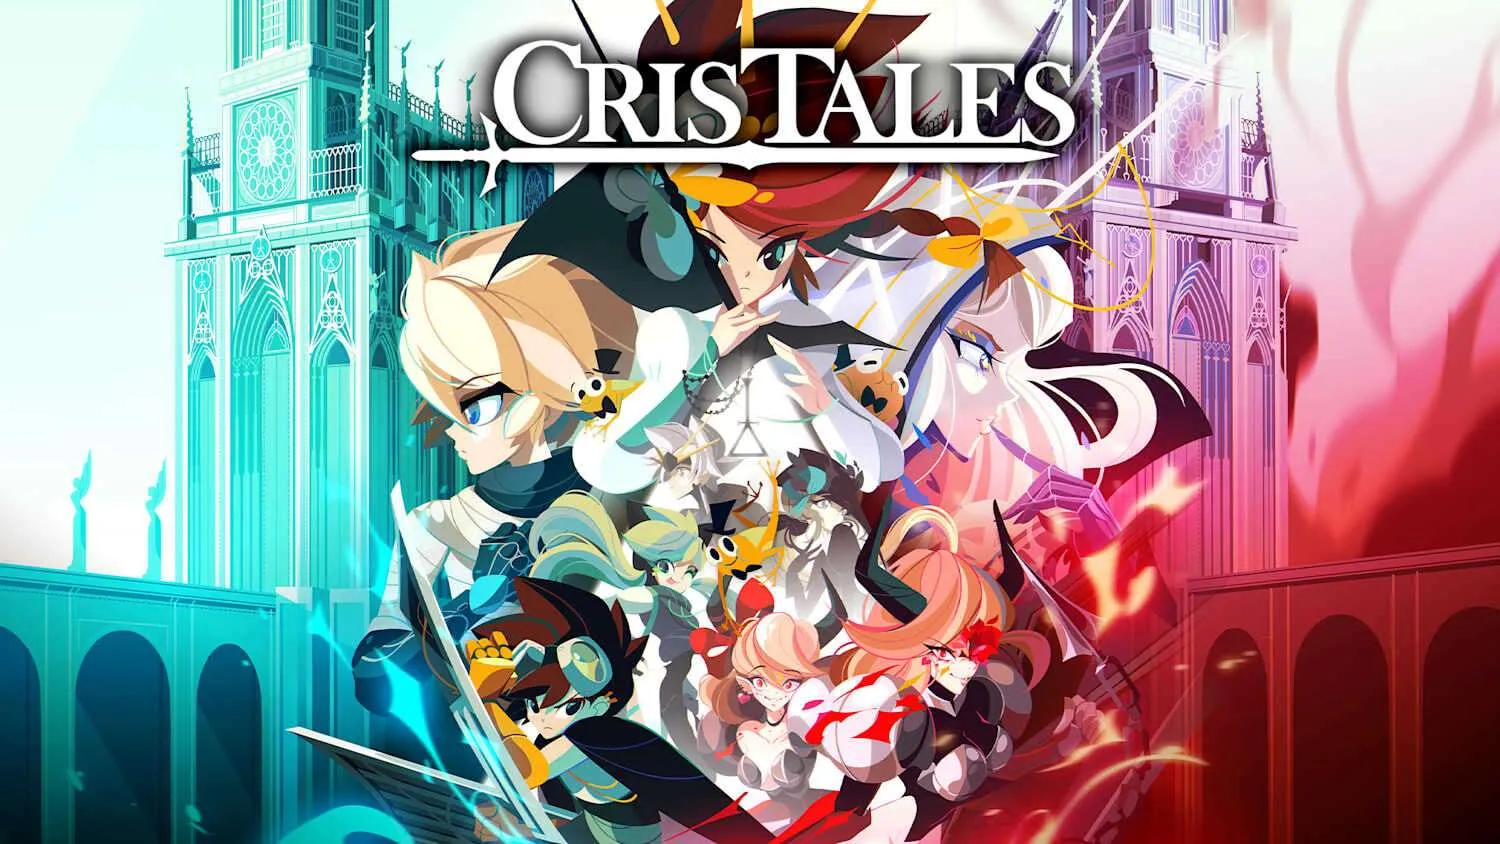 Cris Tales is free at Epic Games Store